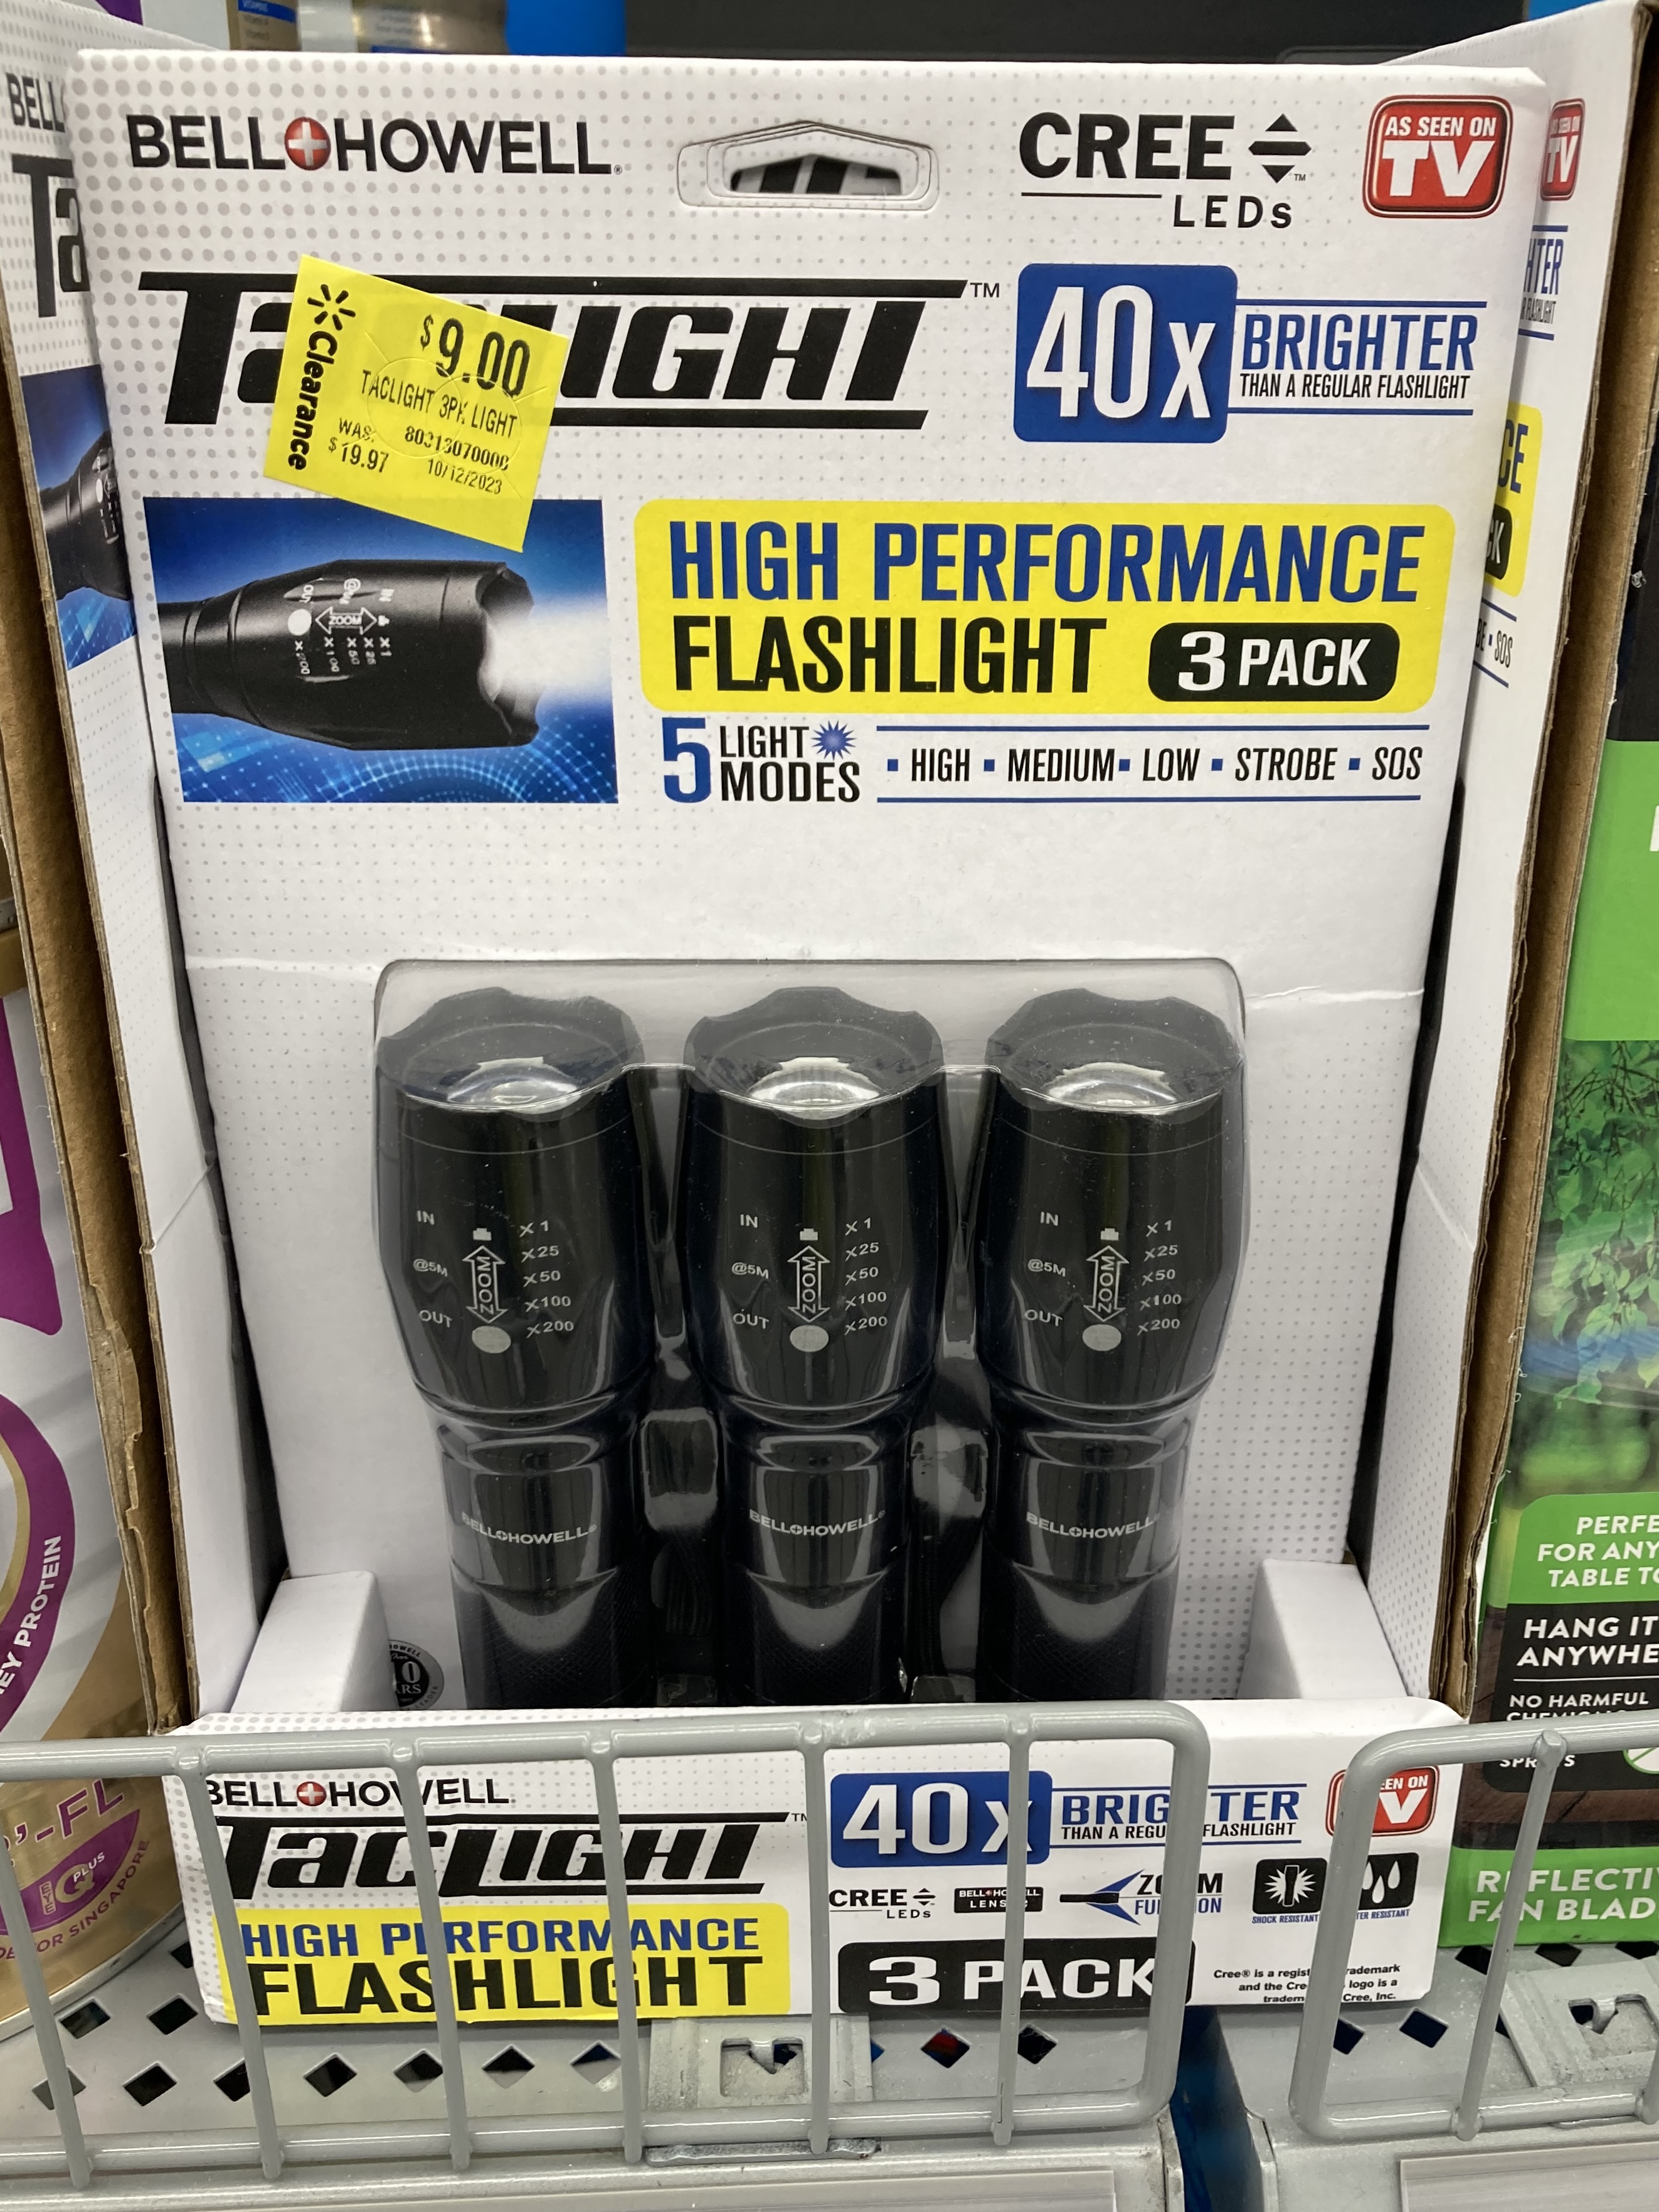 TacLight Zoomable Cree LED Flashlight 3-pack for $9 at Walmart (YMMV clearance)  B&M / in-store (Bell + Howell)